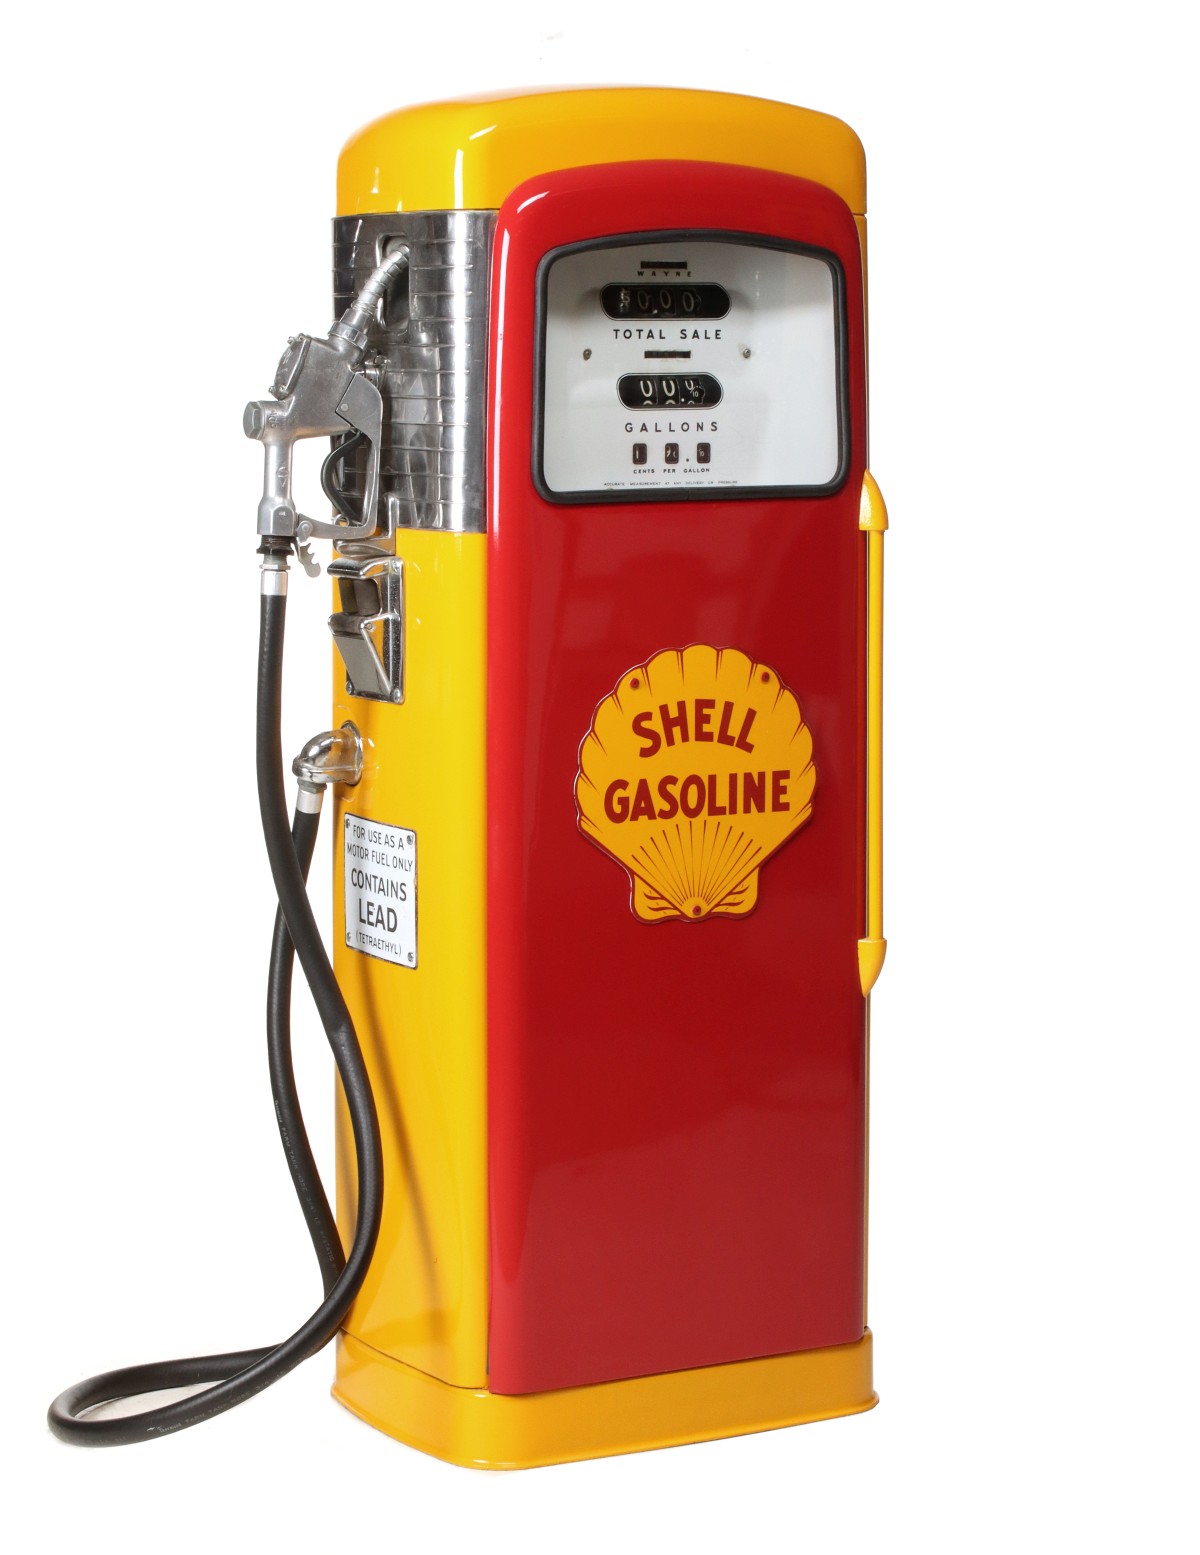 A 1950s WAYNE MODEL 80 GAS PUMP WITH SHELL GRAPHICS